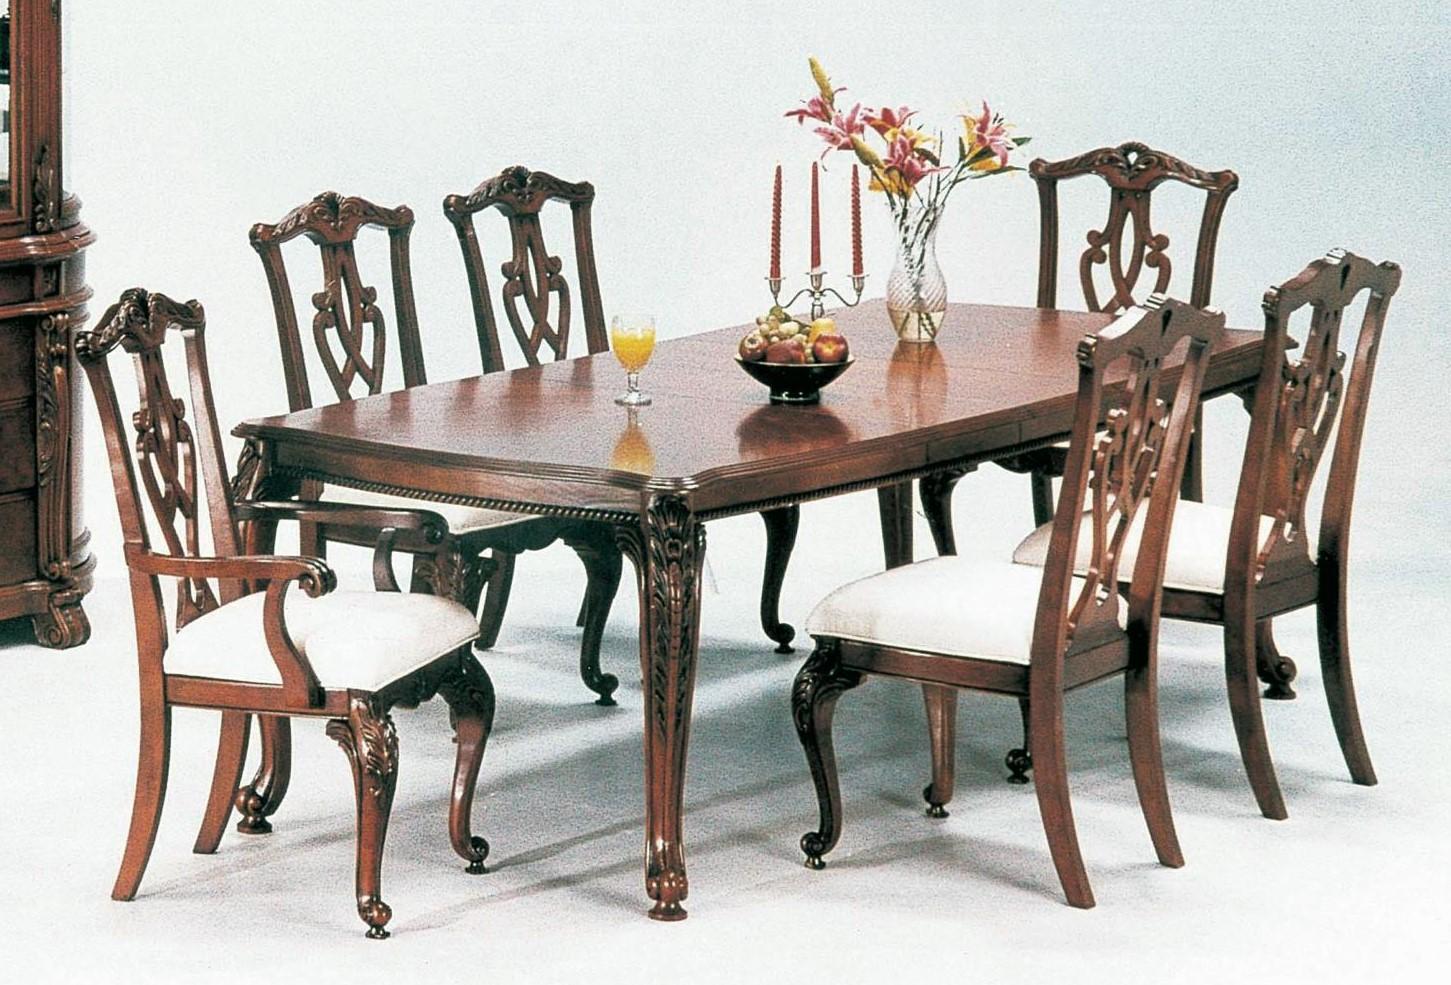 

    
MYCO Furniture Charity Traditional Cherry Finish Carved Wood Dining Room Set 5Pc
